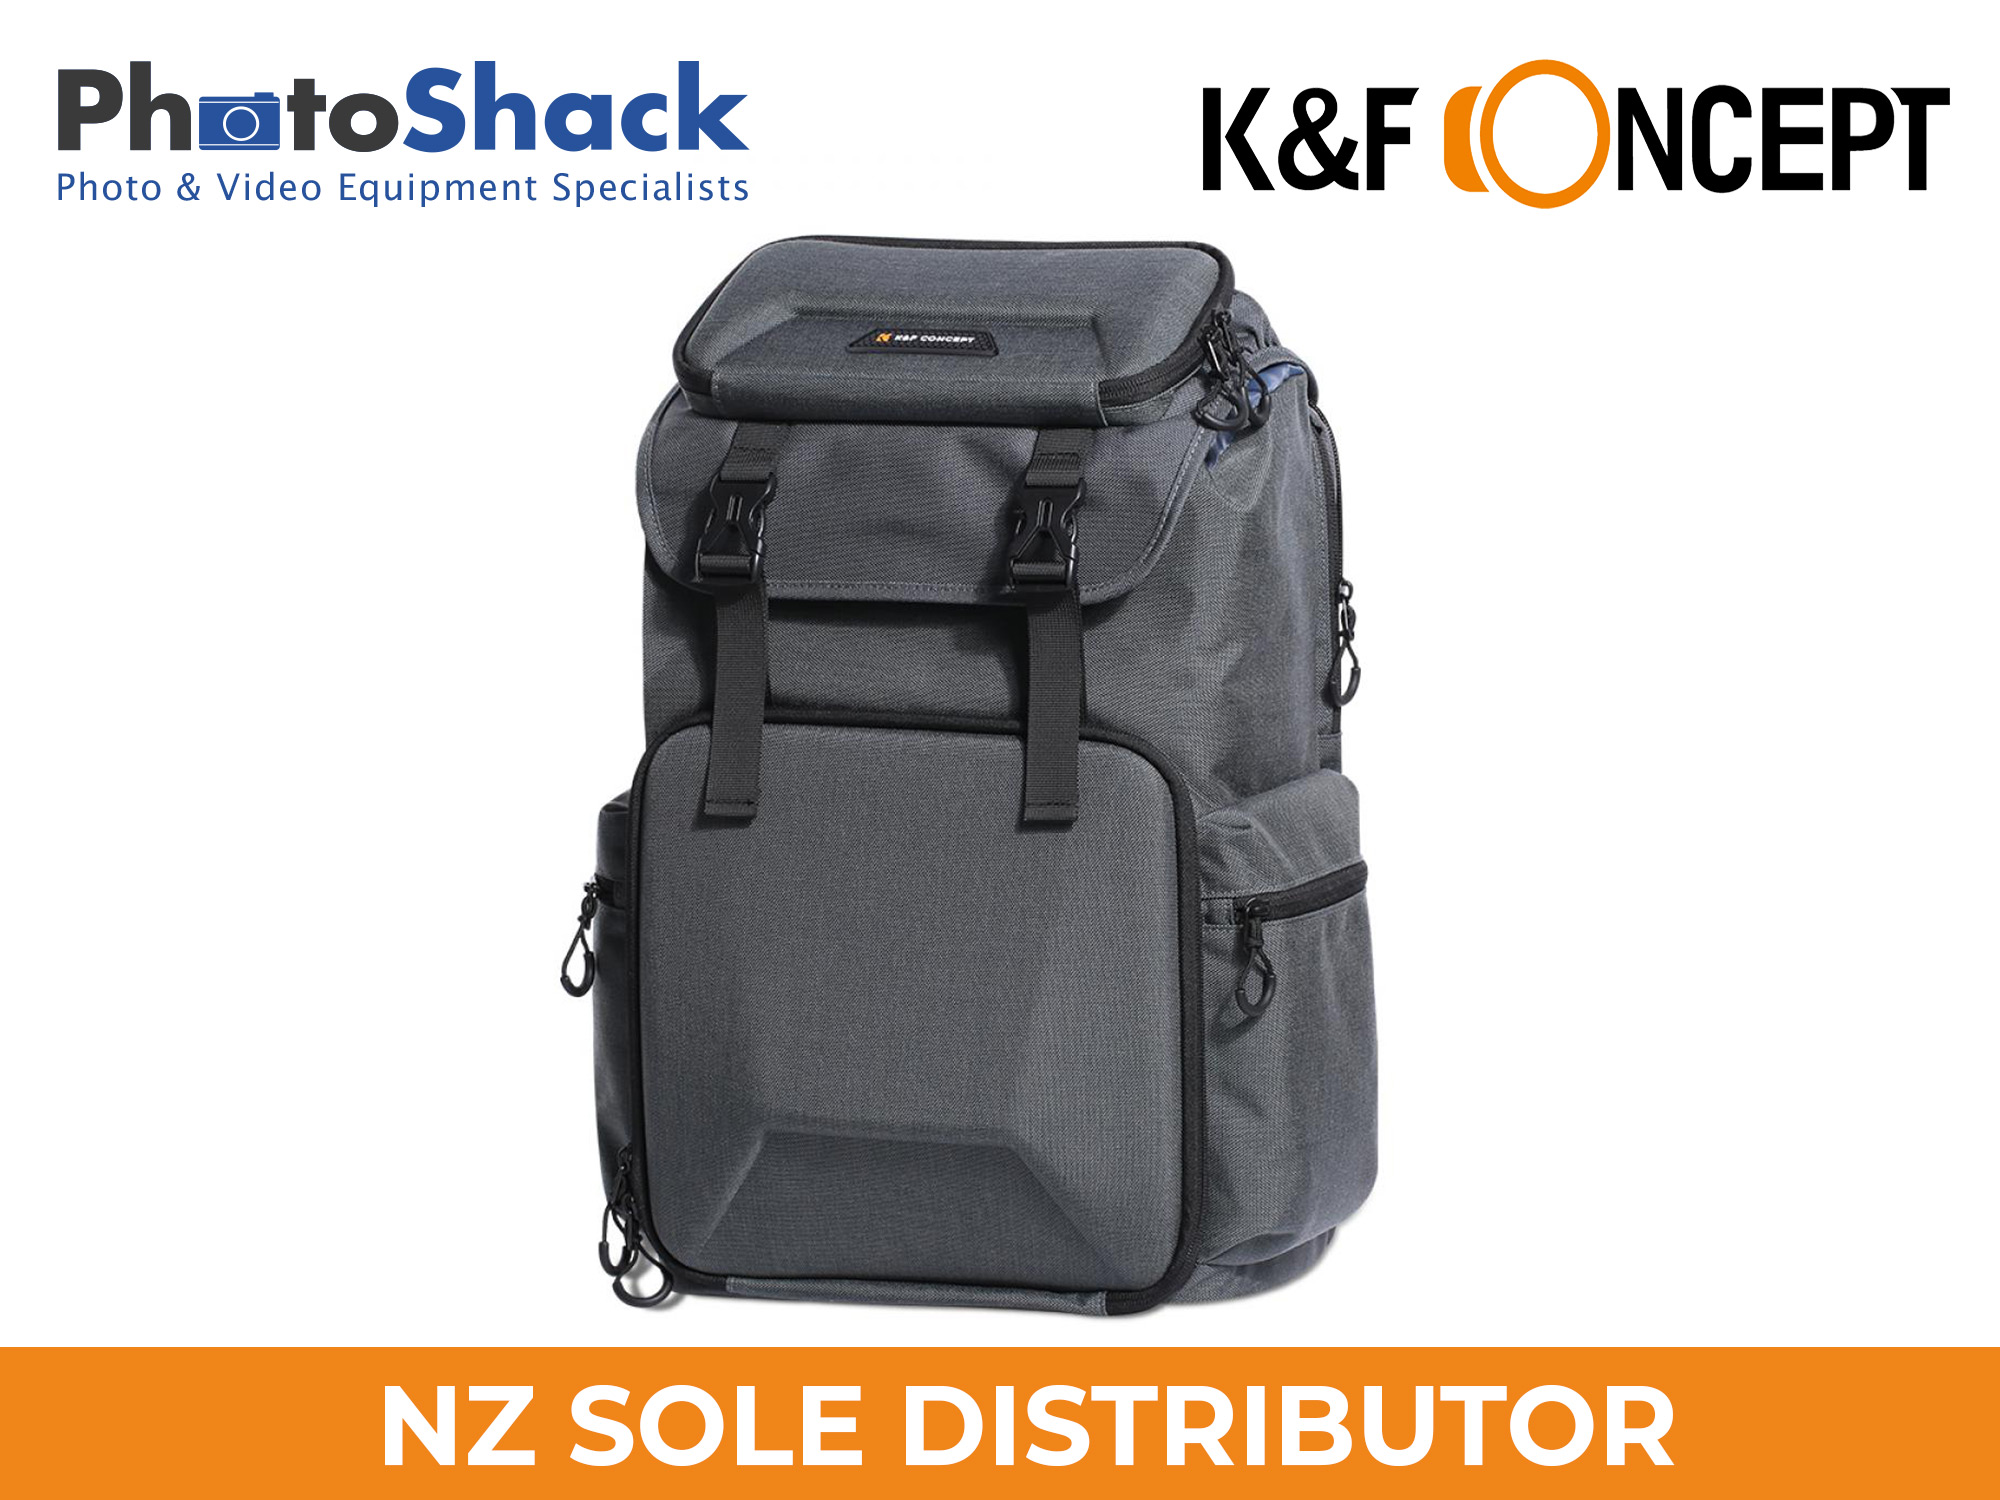 K&F Professional Camera and Laptop Backpack 25L for DSLR, SLR, and Mirrorless Cameras